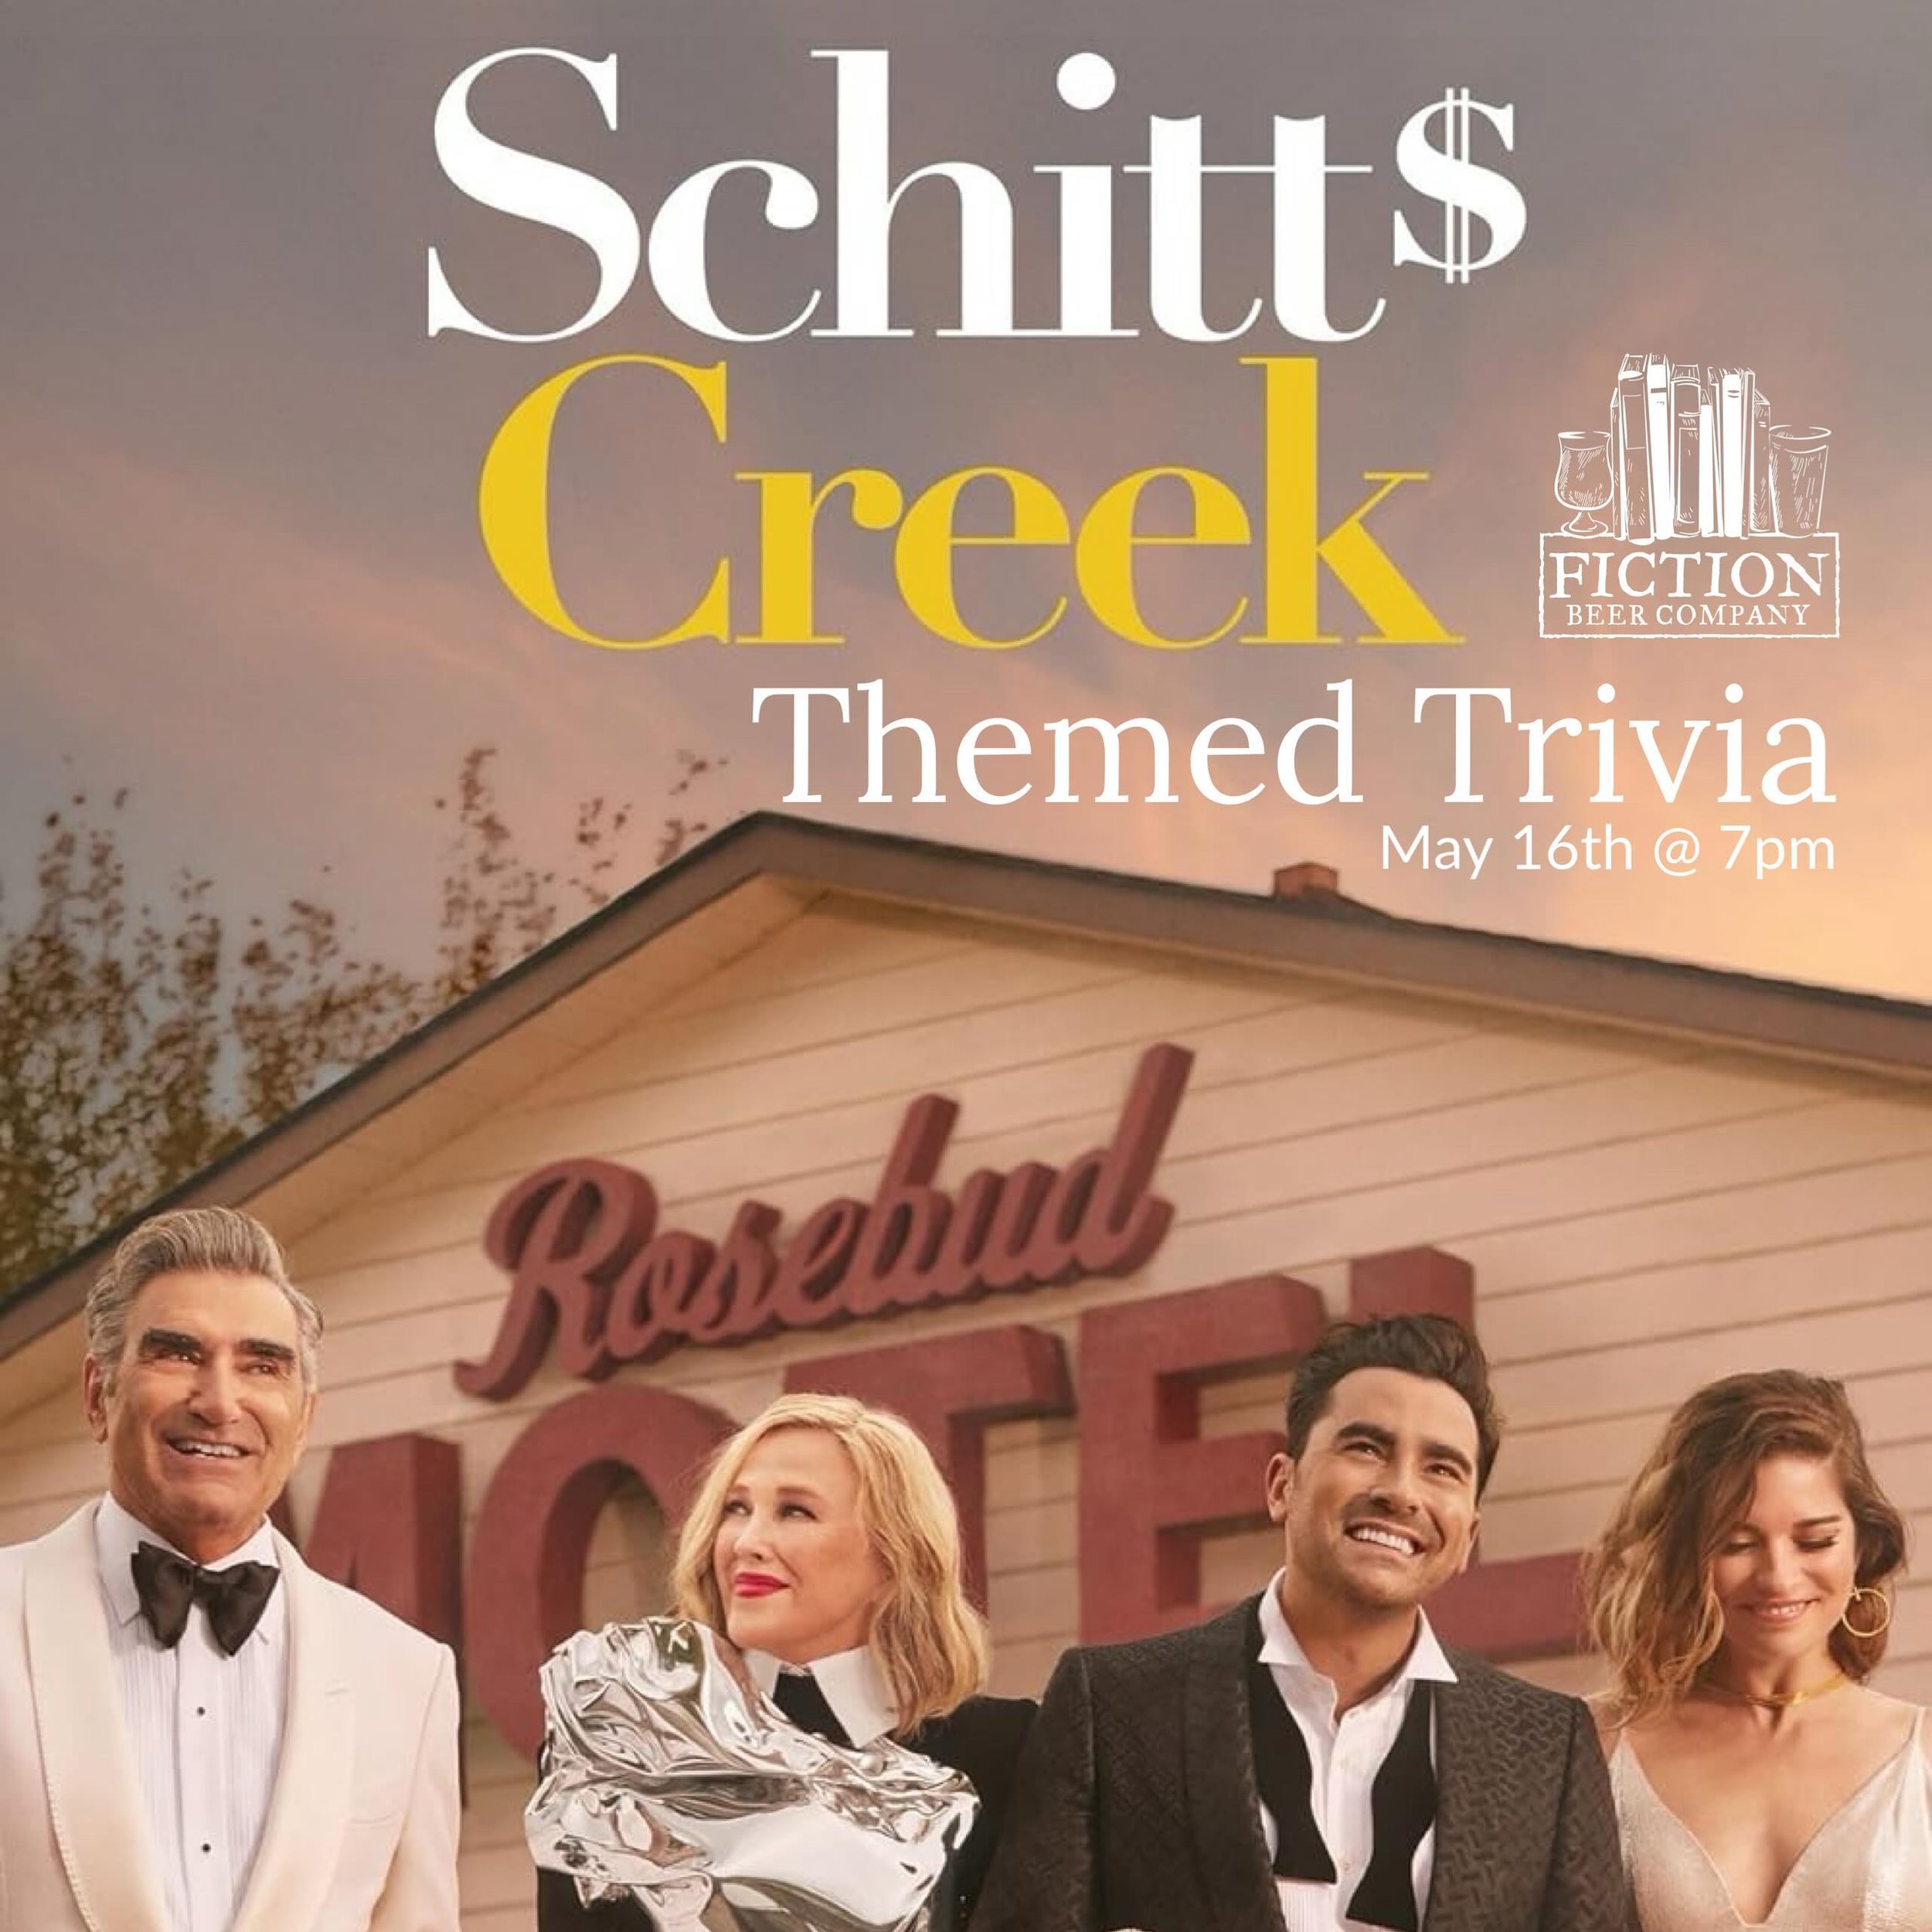 David, stop acting like a disgruntled pelican and join us on Thursday, May 16th @ 7pm for a hilarious night of trivia celebrating 6 seasons of Rose family antics. 

We&rsquo;re compiling 5 rounds of trivia after a complete and thorough Netflix binge 